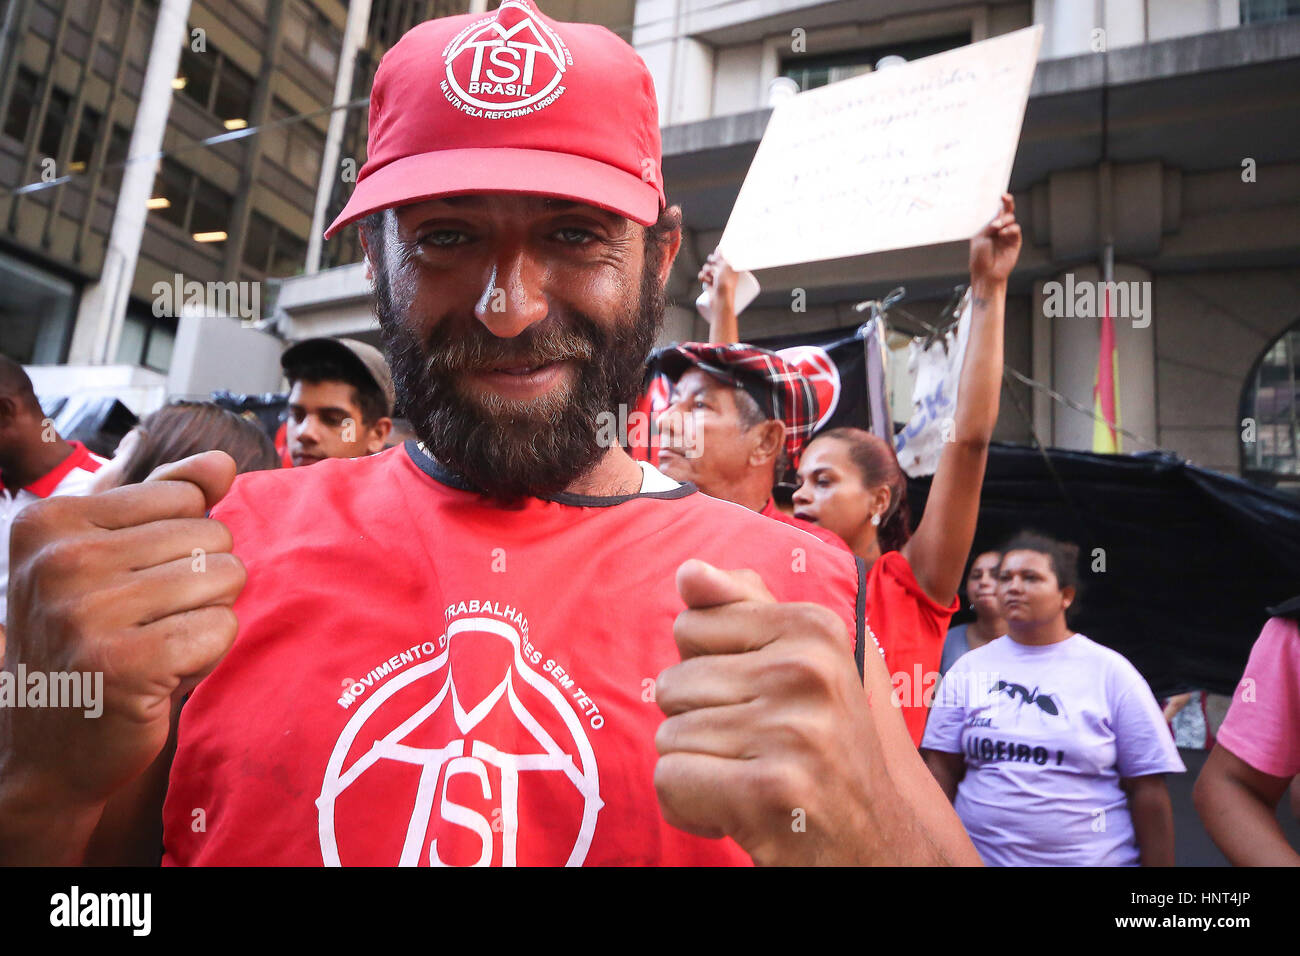 Sao Paulo, Brazil. 16th Feb, 2017. hundreds of people from the homeless workers movement (MTST acronym in Portuguese) raise a camp claiming housing in front of the presidential berau on Paulista Avenue Credit: Dario Oliveira/ZUMA Wire/Alamy Live News Stock Photo